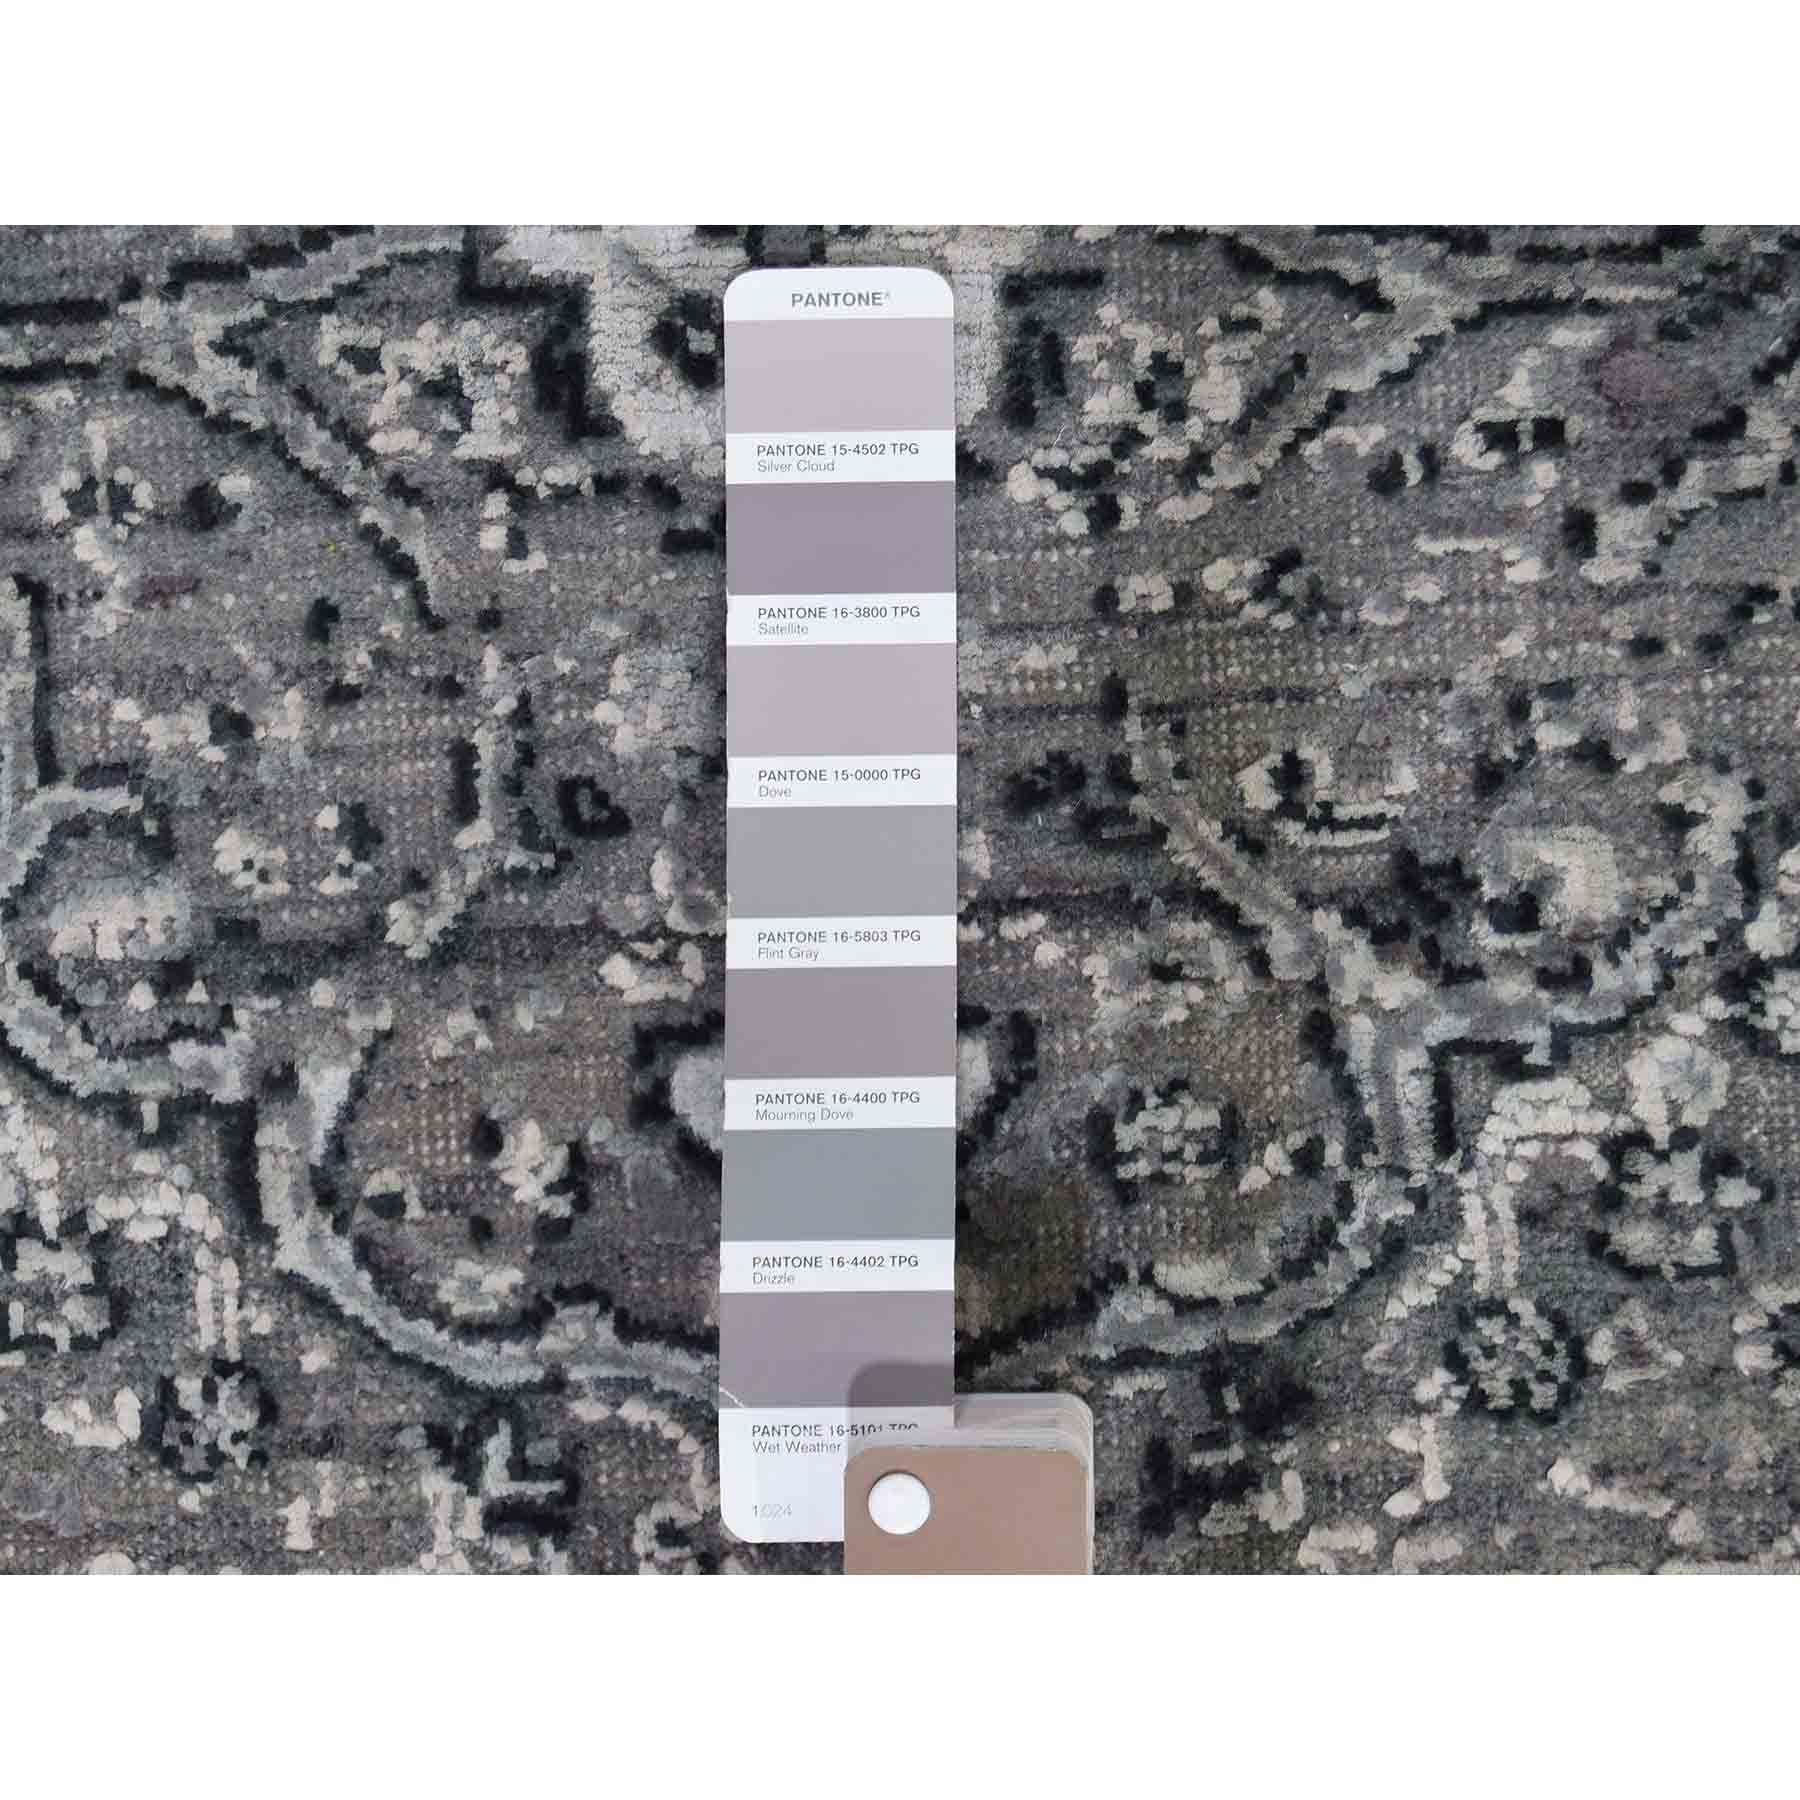 Transitional-Hand-Knotted-Rug-231095